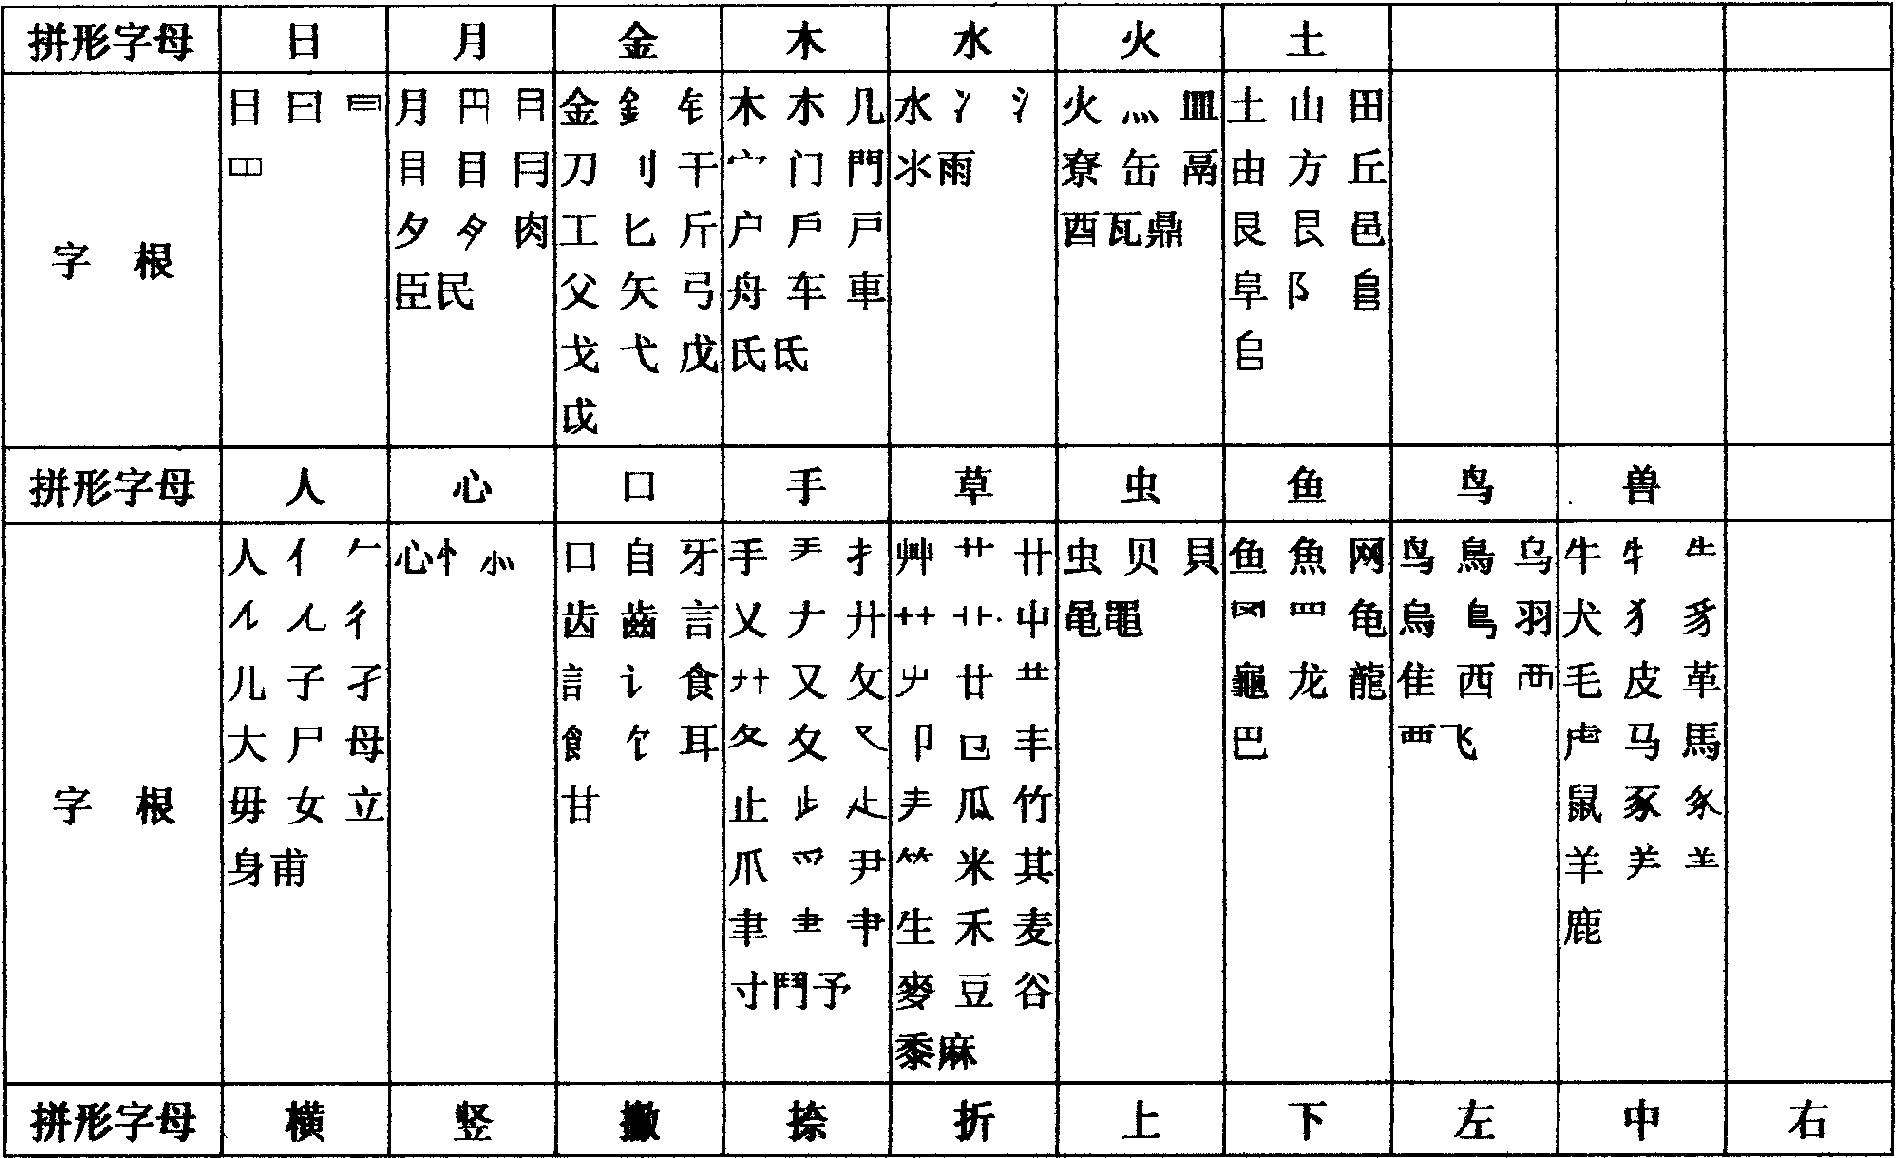 Method of Chinese character coding, retrieve and input